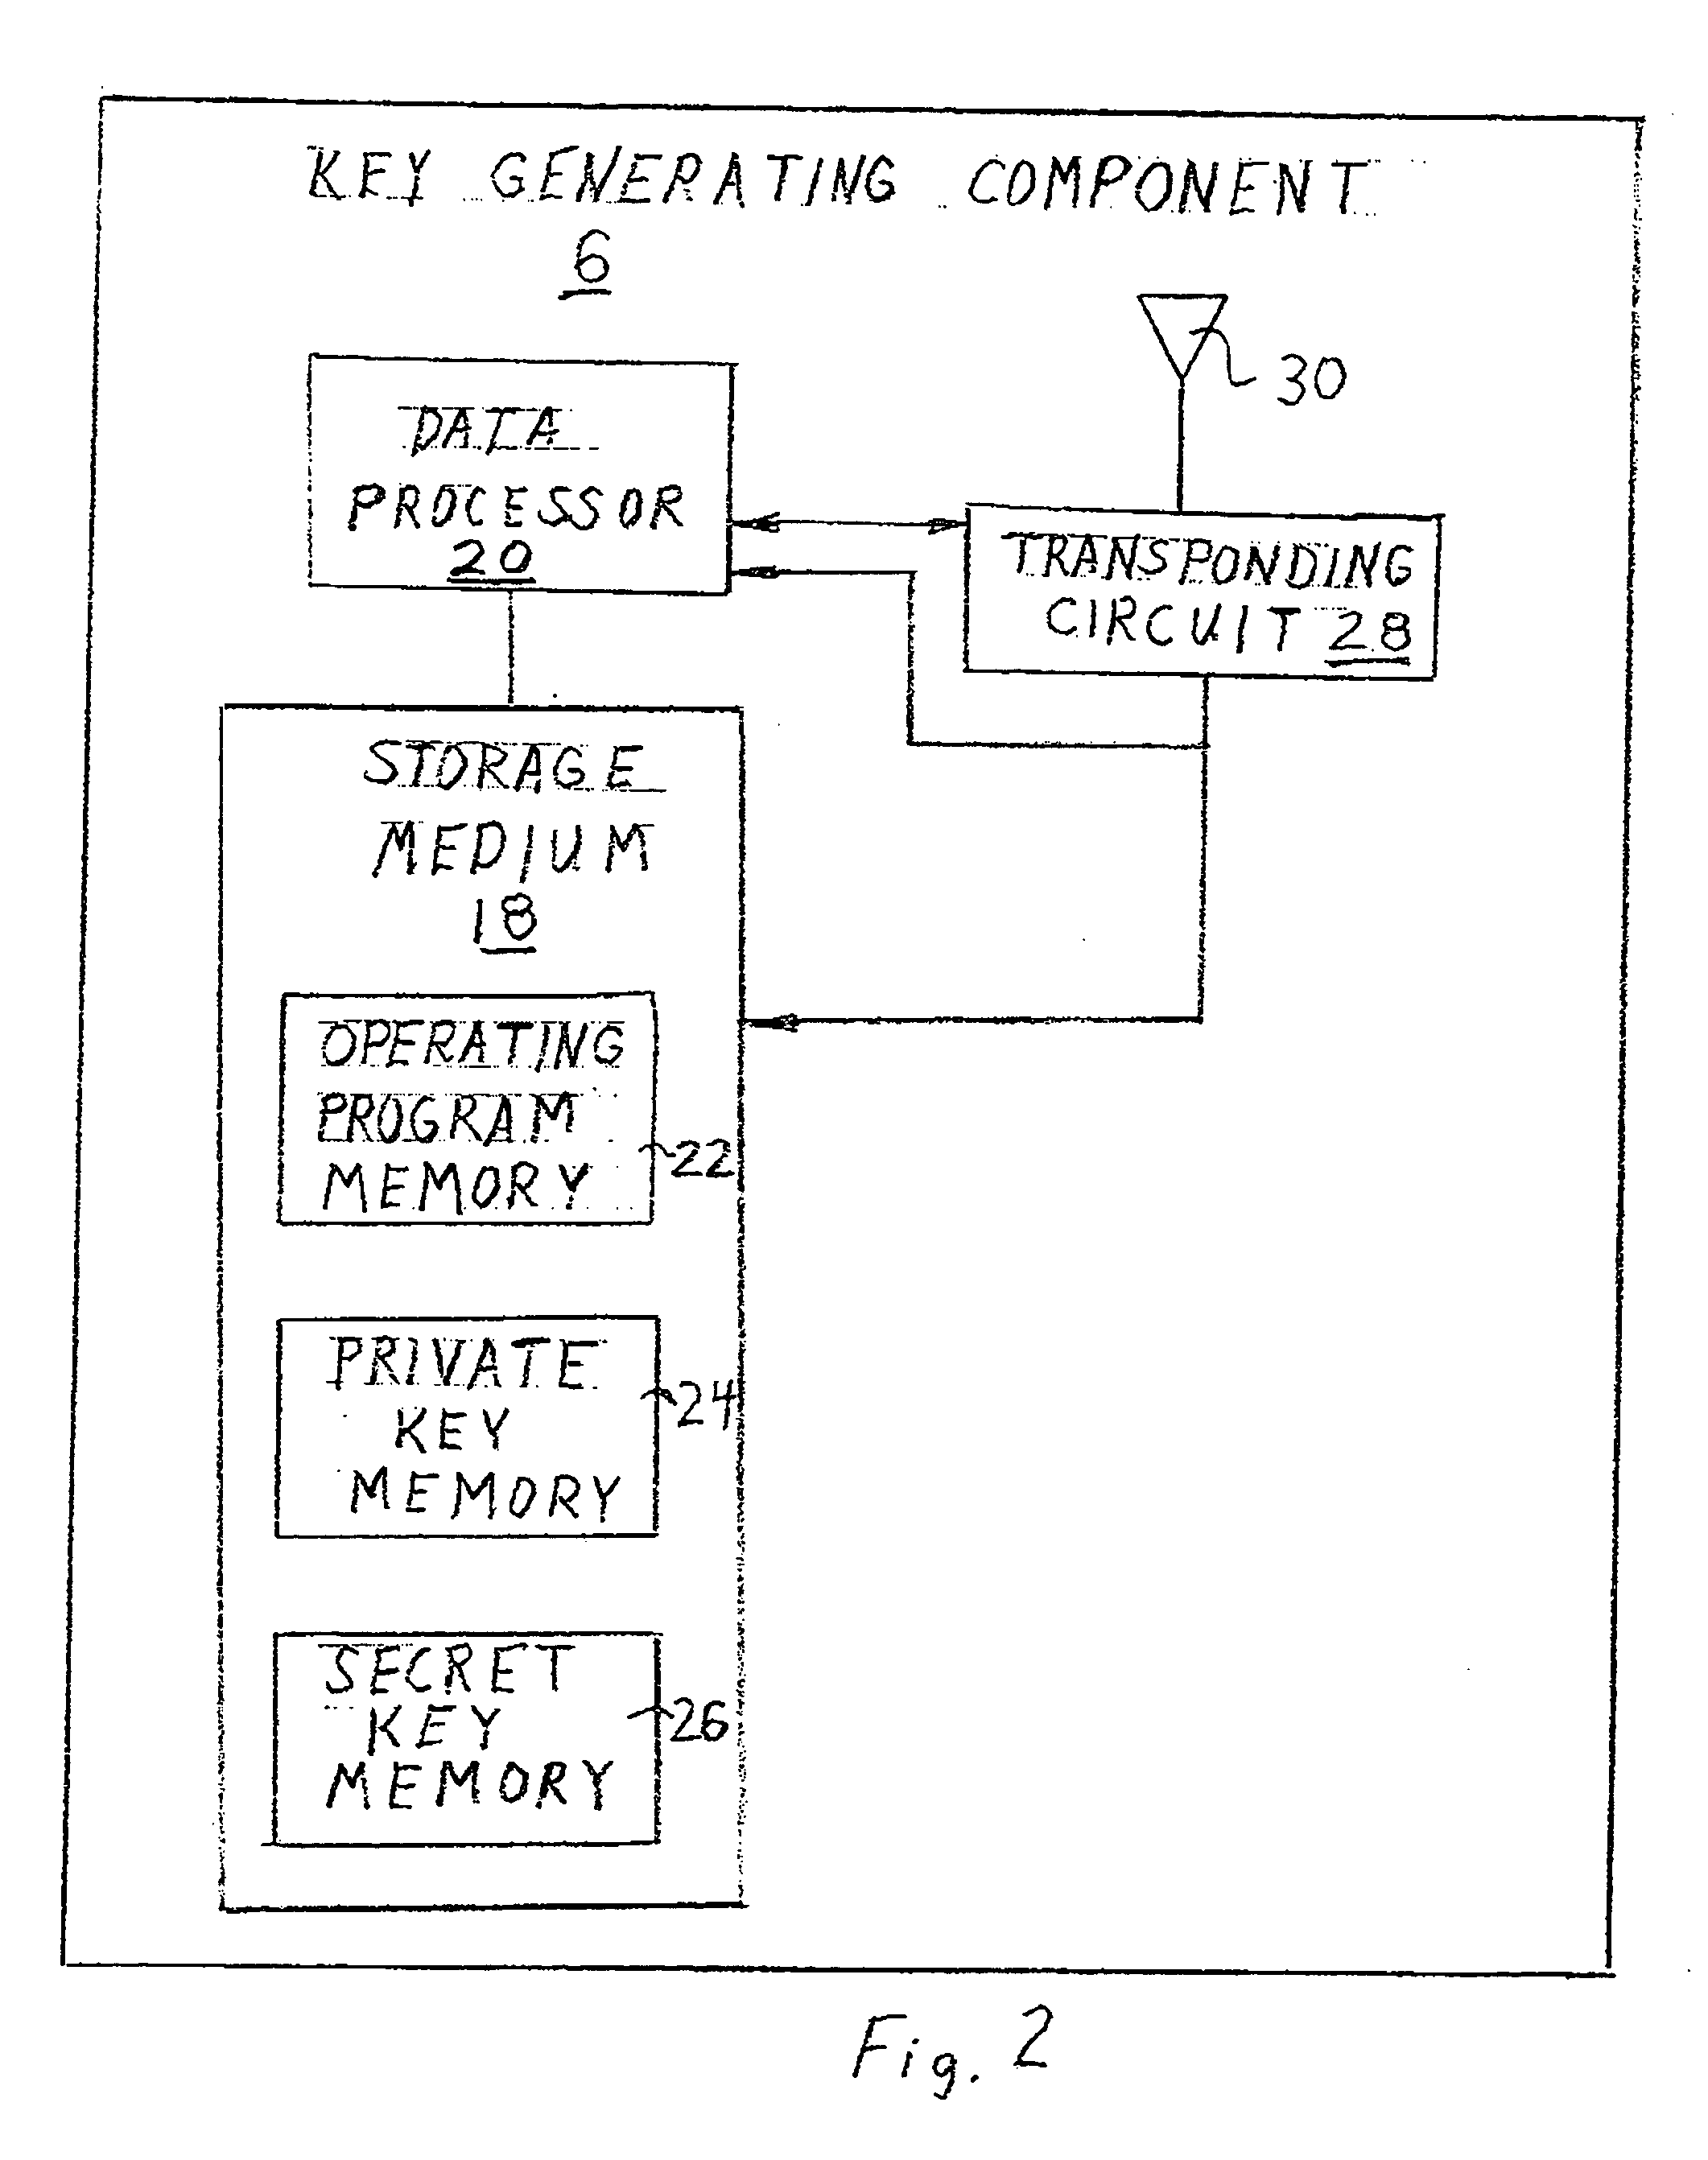 Security system for handheld wireless devices using-time variable encryption keys